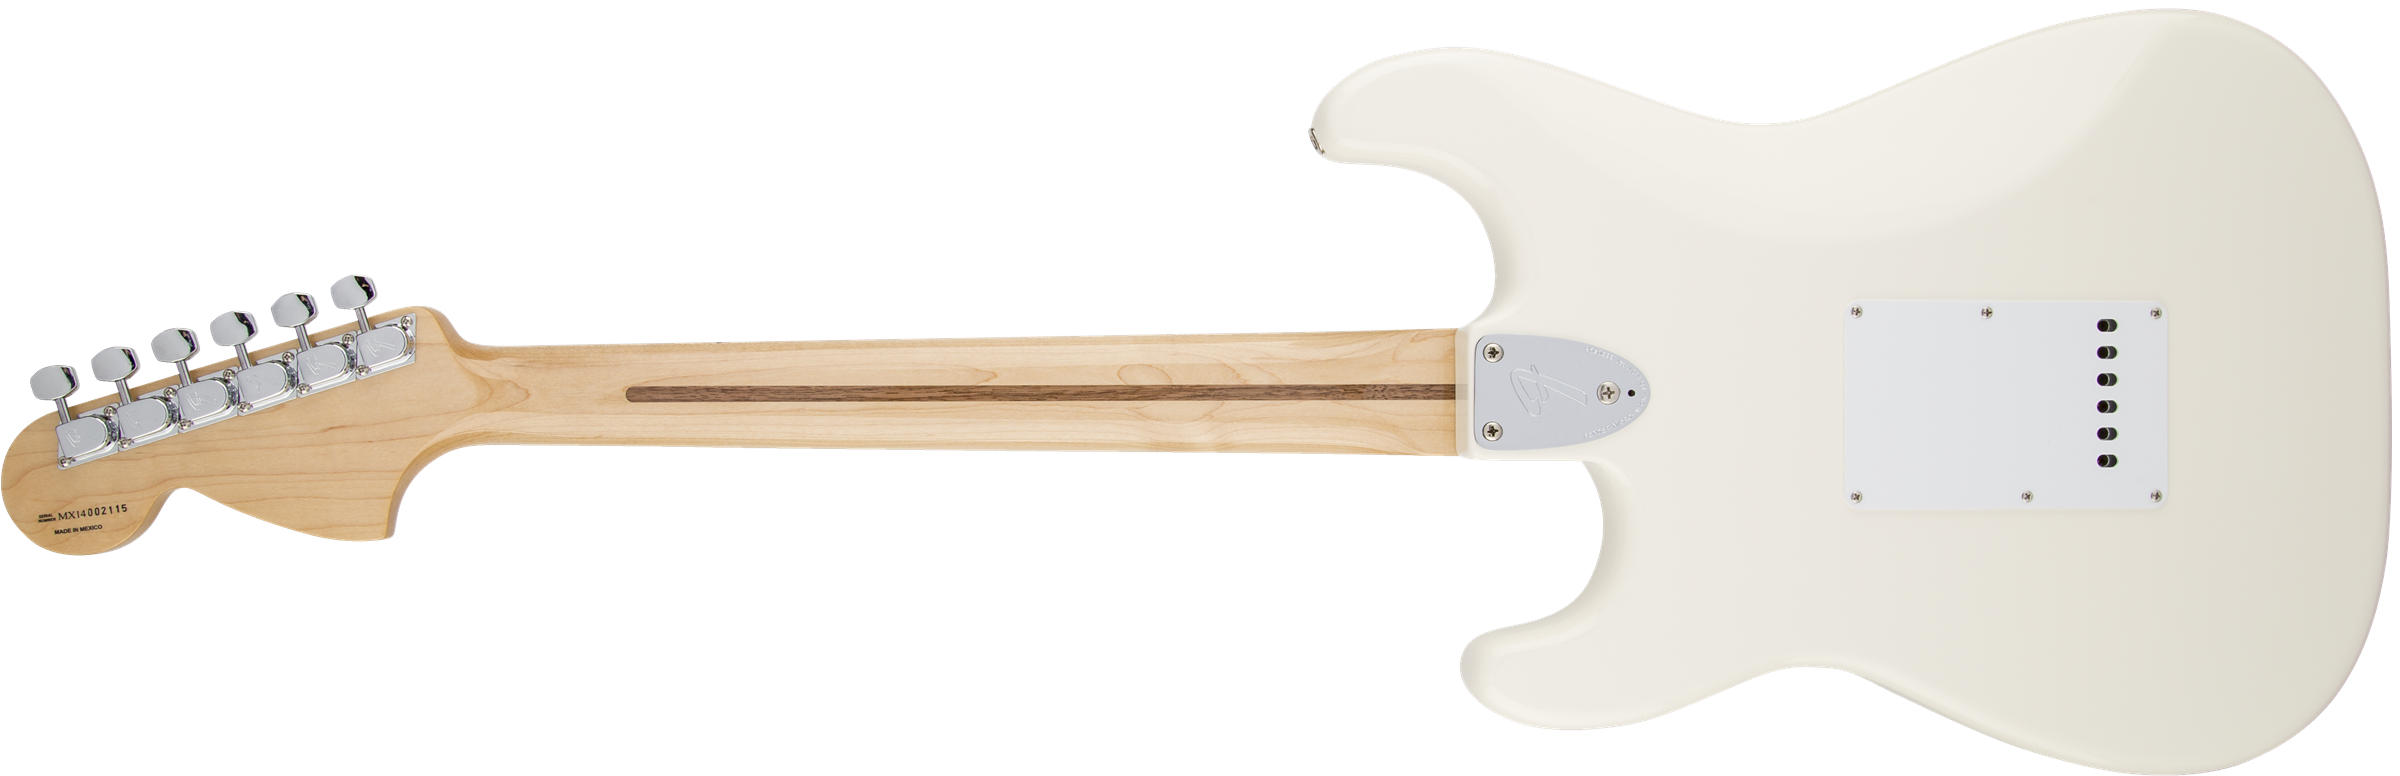 Ritchie Blackmore Stratocaster Scalloped Rosewood Fingerboard, Olympic White背面画像